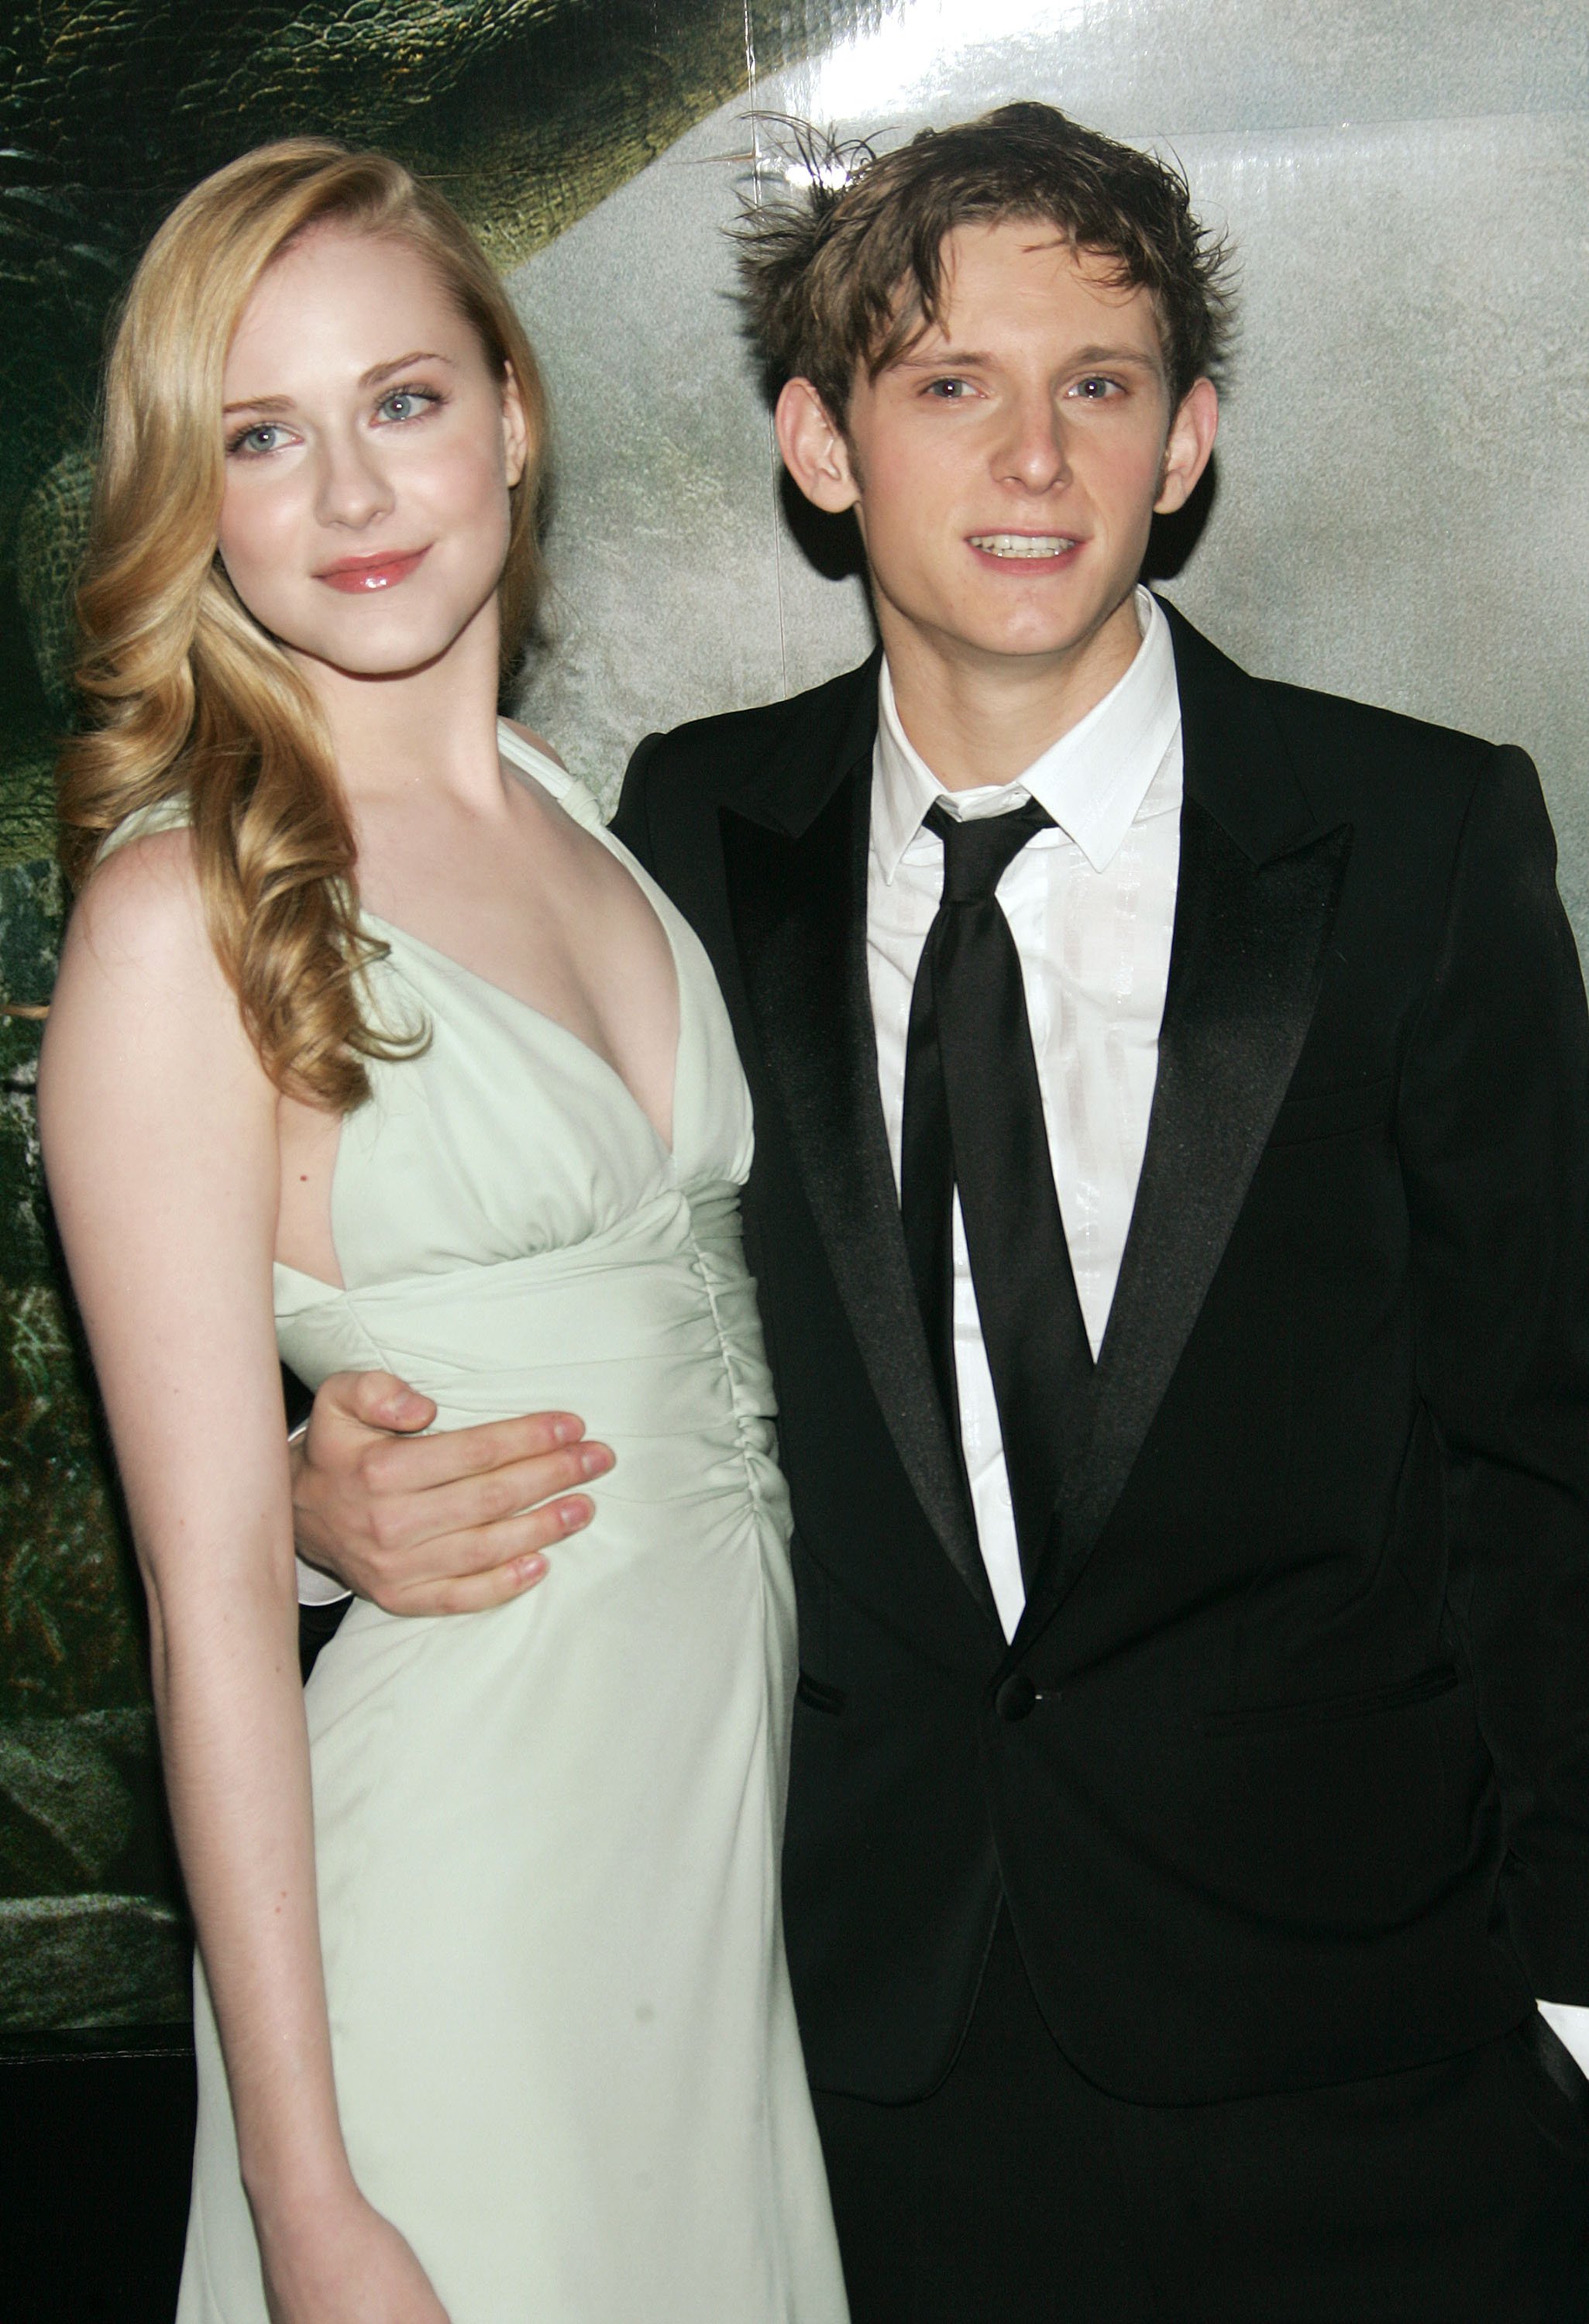 Actors Evan Rachel Wood and Jamie Bell attend the Universal Pictures premiere of "King Kong" on December 5, 2005, in New York City. I Source: Getty Images